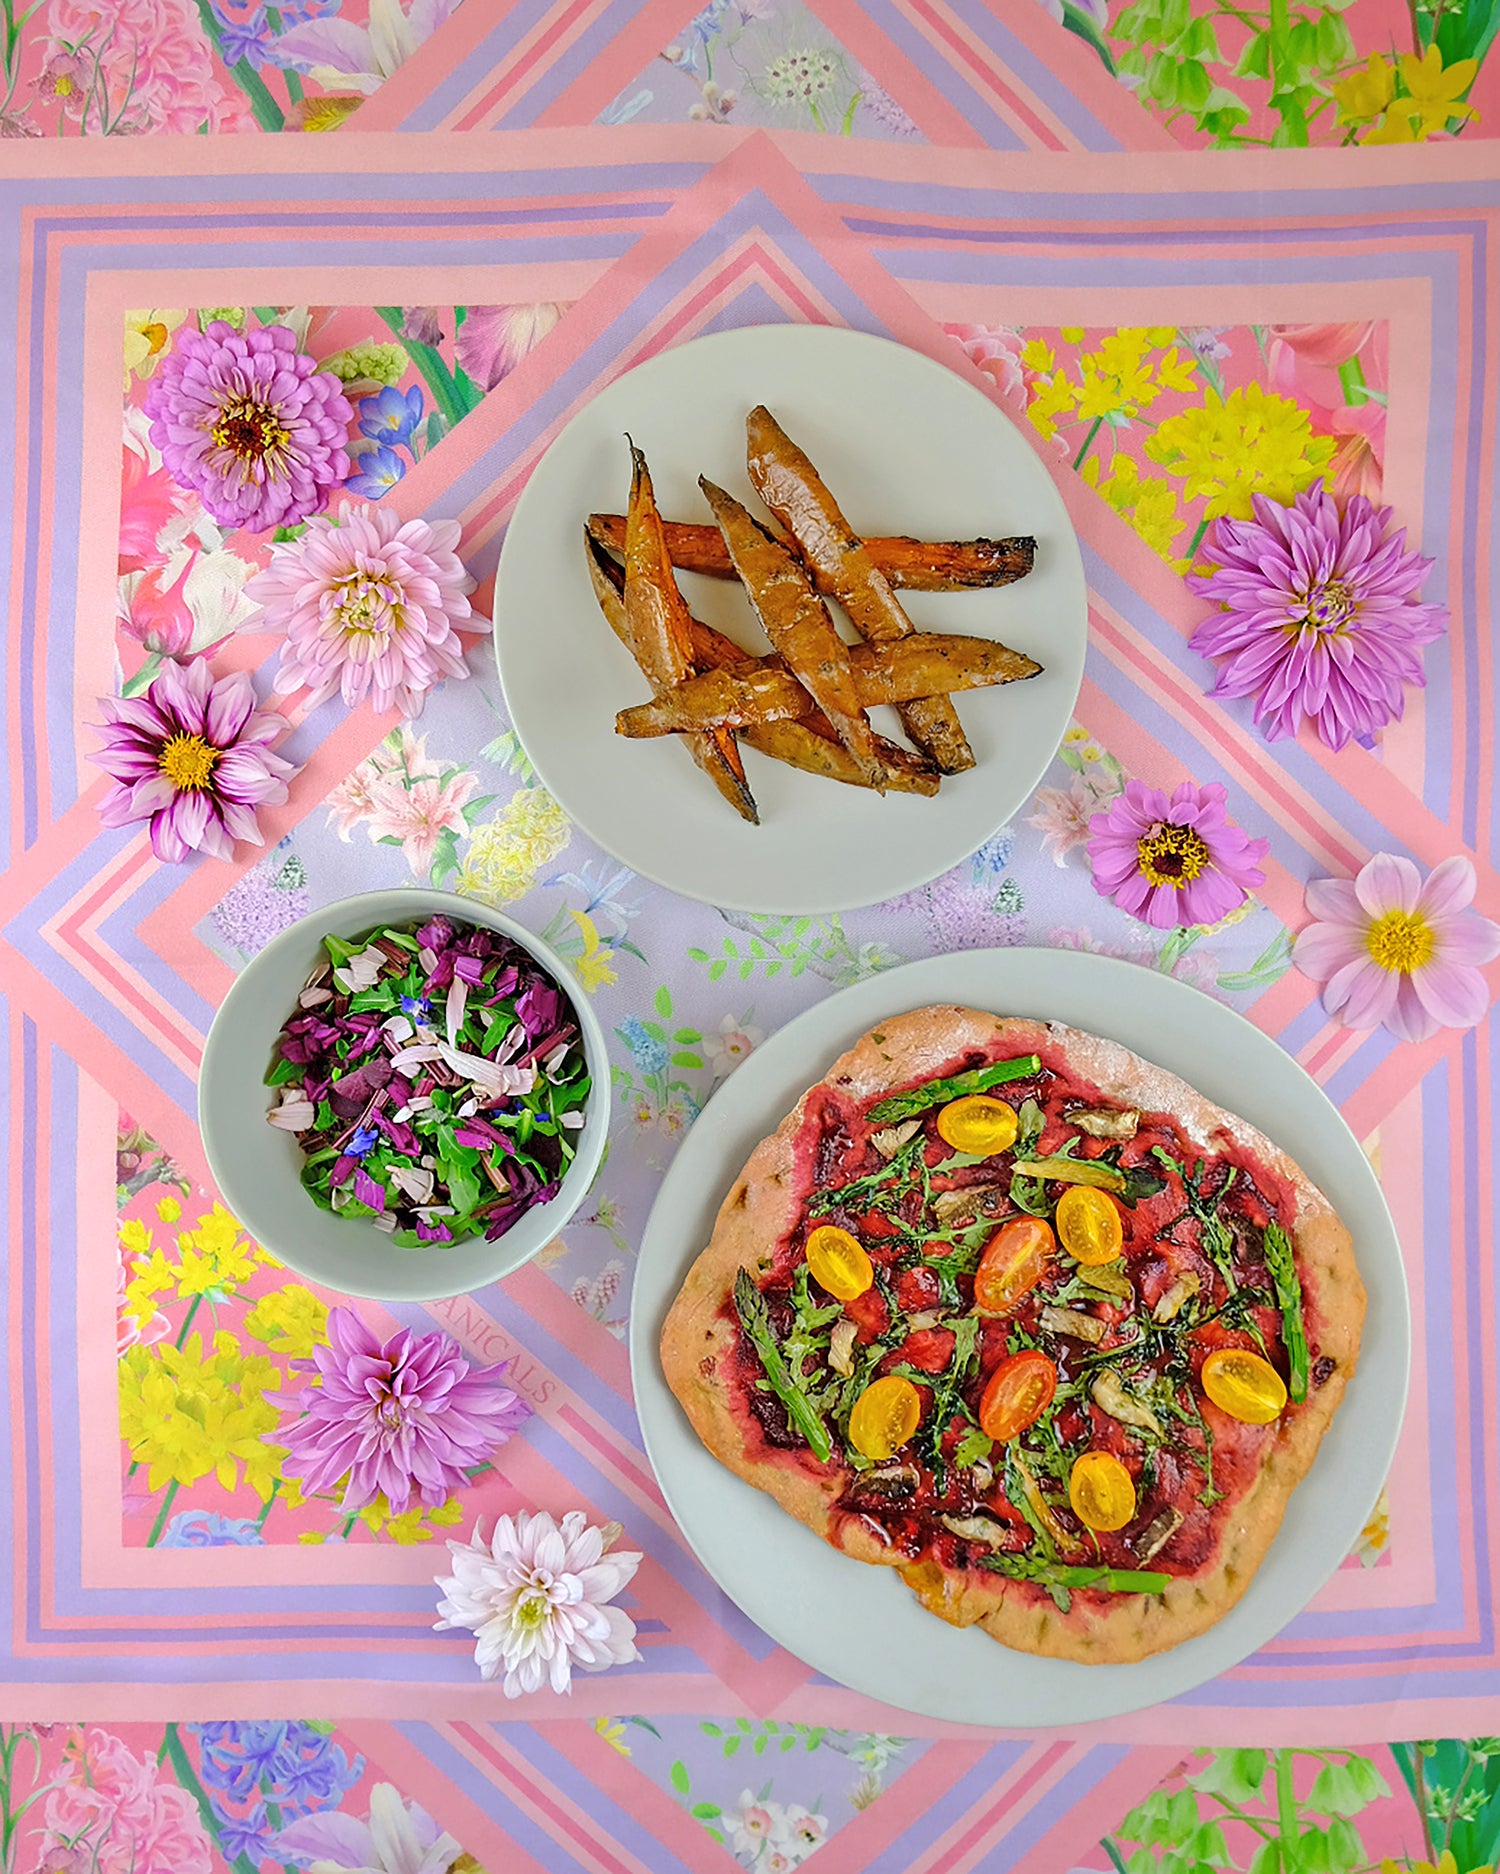 healthy colourful and vegan meal inspiration using beetroot and edible flowers for pizza